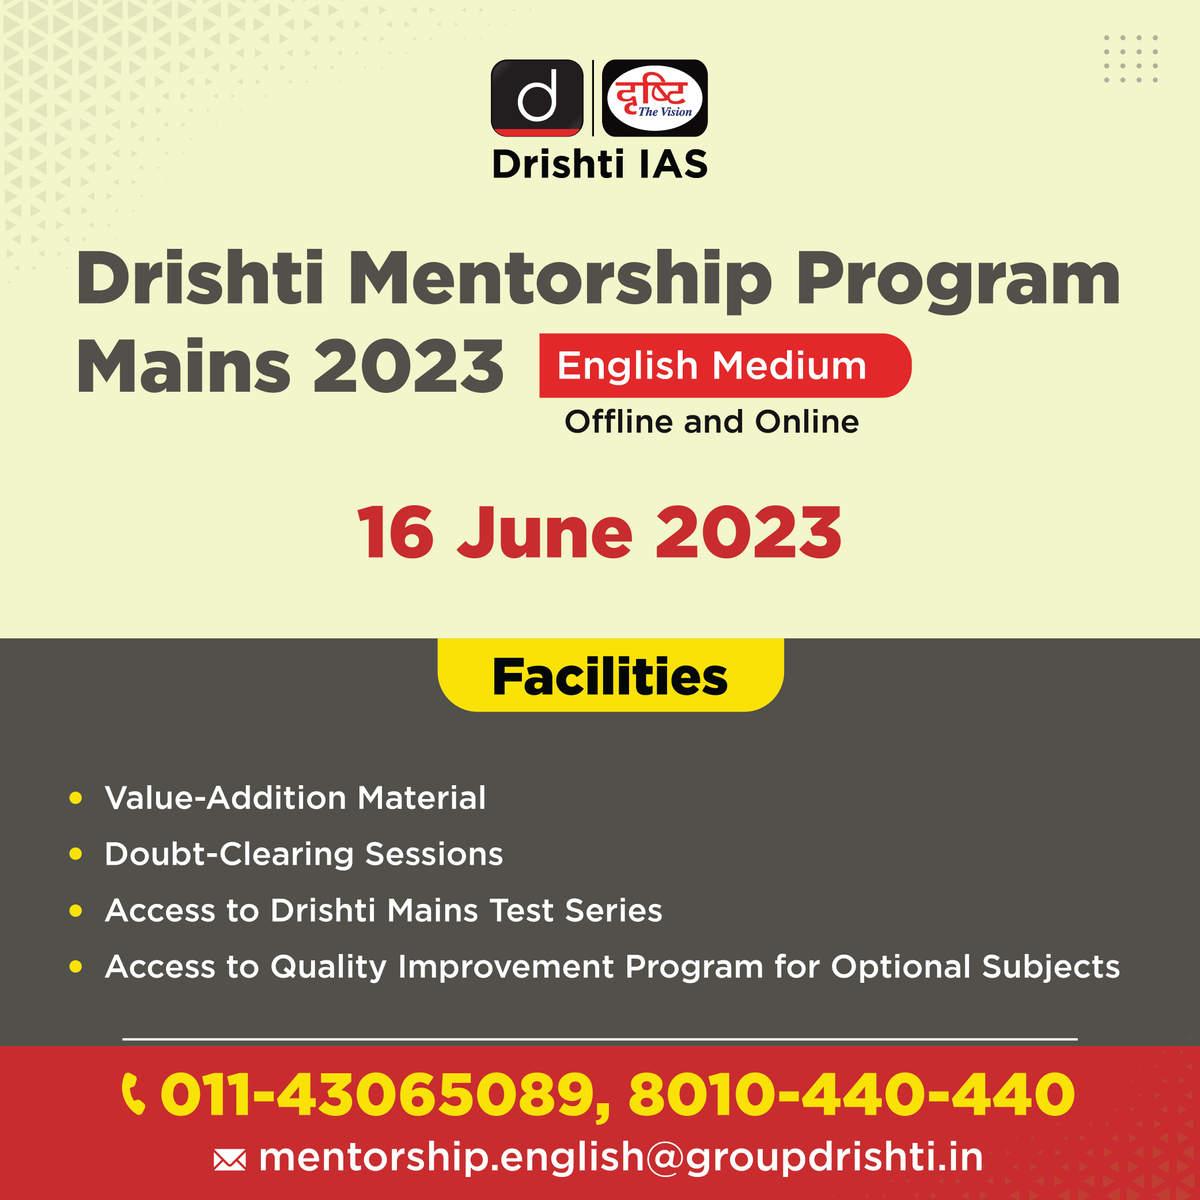 Enhance your #Preparation with Drishti #MentorshipProgram #Mains2023, designed to boost your performance.
drishti.link/DMP-Mains2023
Register Now: drishti.link/Reg-DMP-Mains2…

#DrishtiMentorshipProgramForMains #IAS #CSE #UPSC #Mentorship #UPSC2023 #Mains #DrishtiIAS #DrishtiIASEnglish